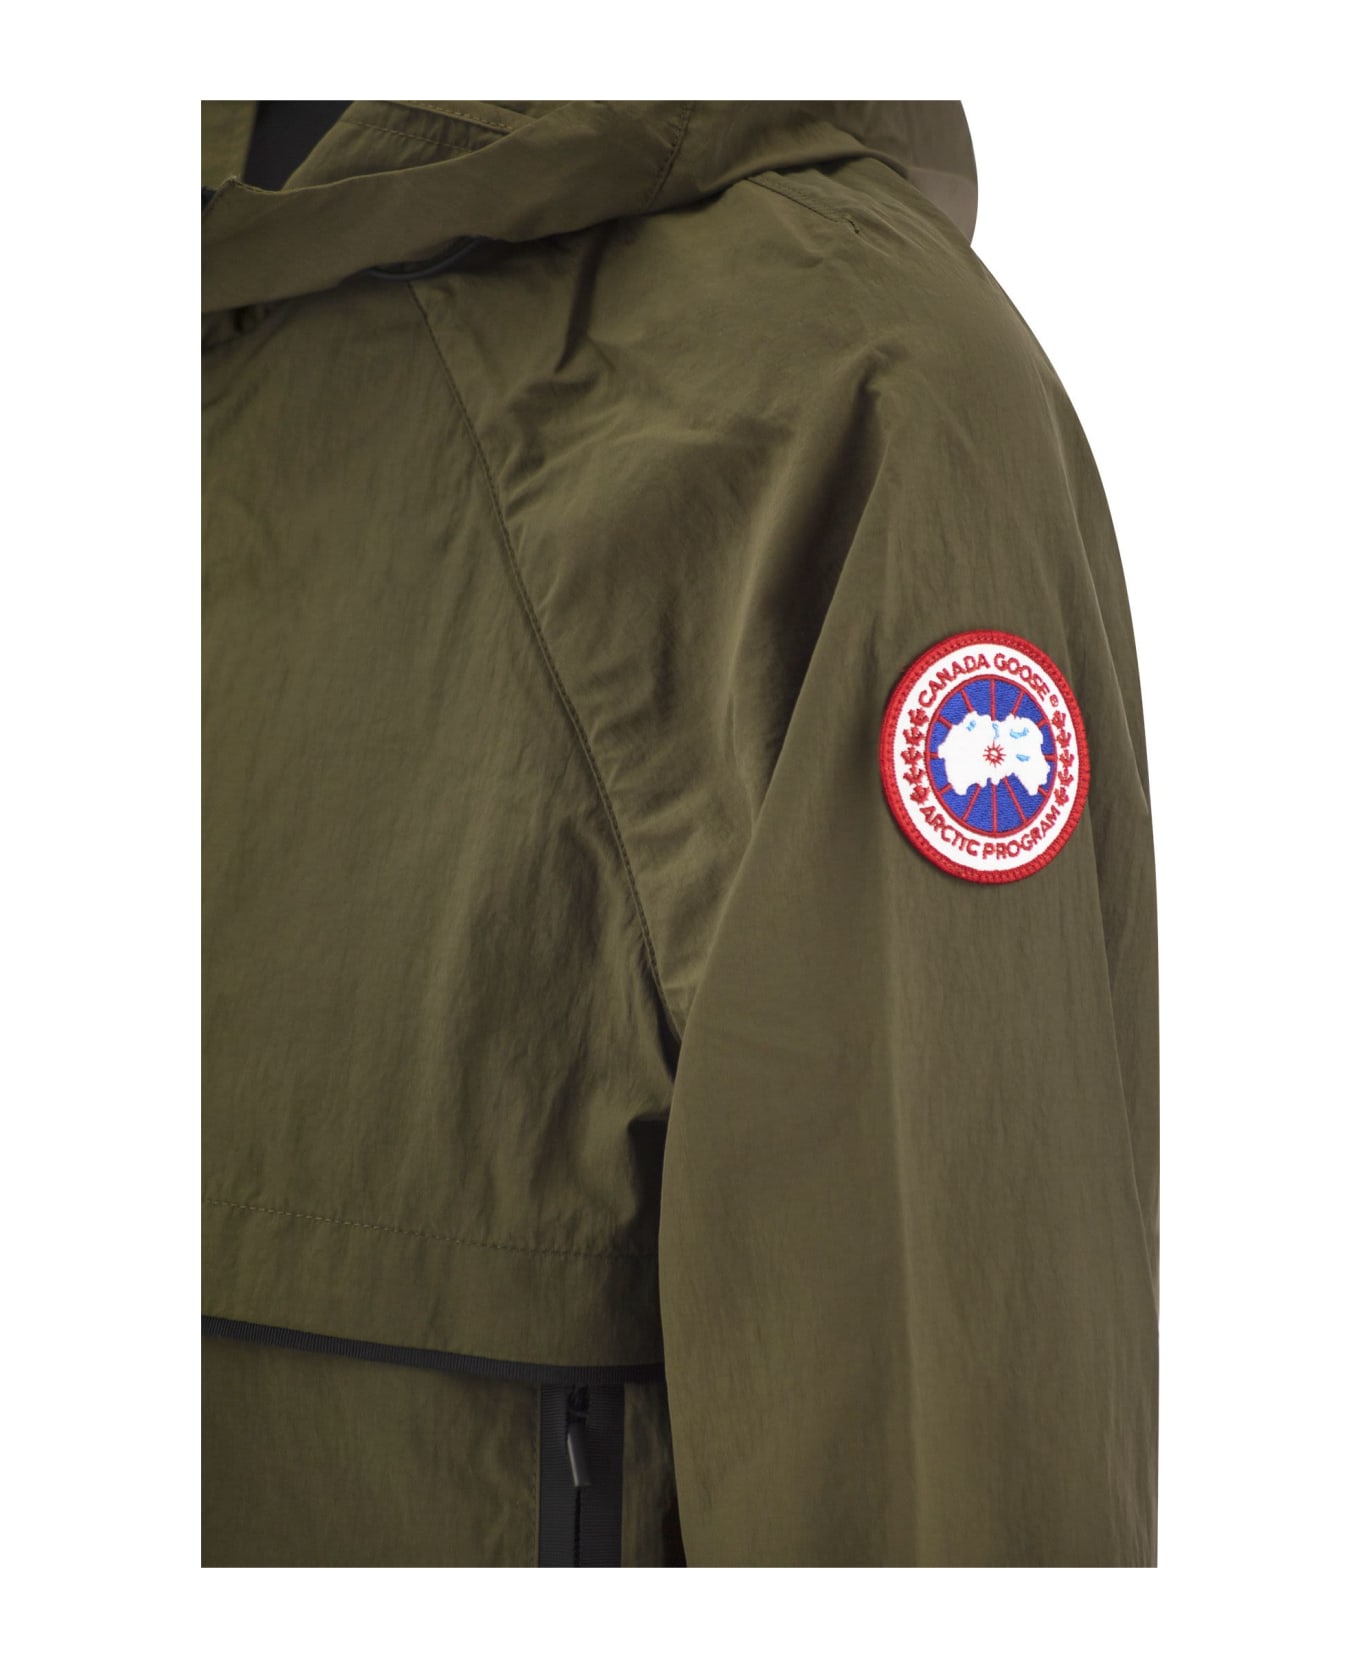 Canada Goose Faber - Hooded Jacket - Military Green